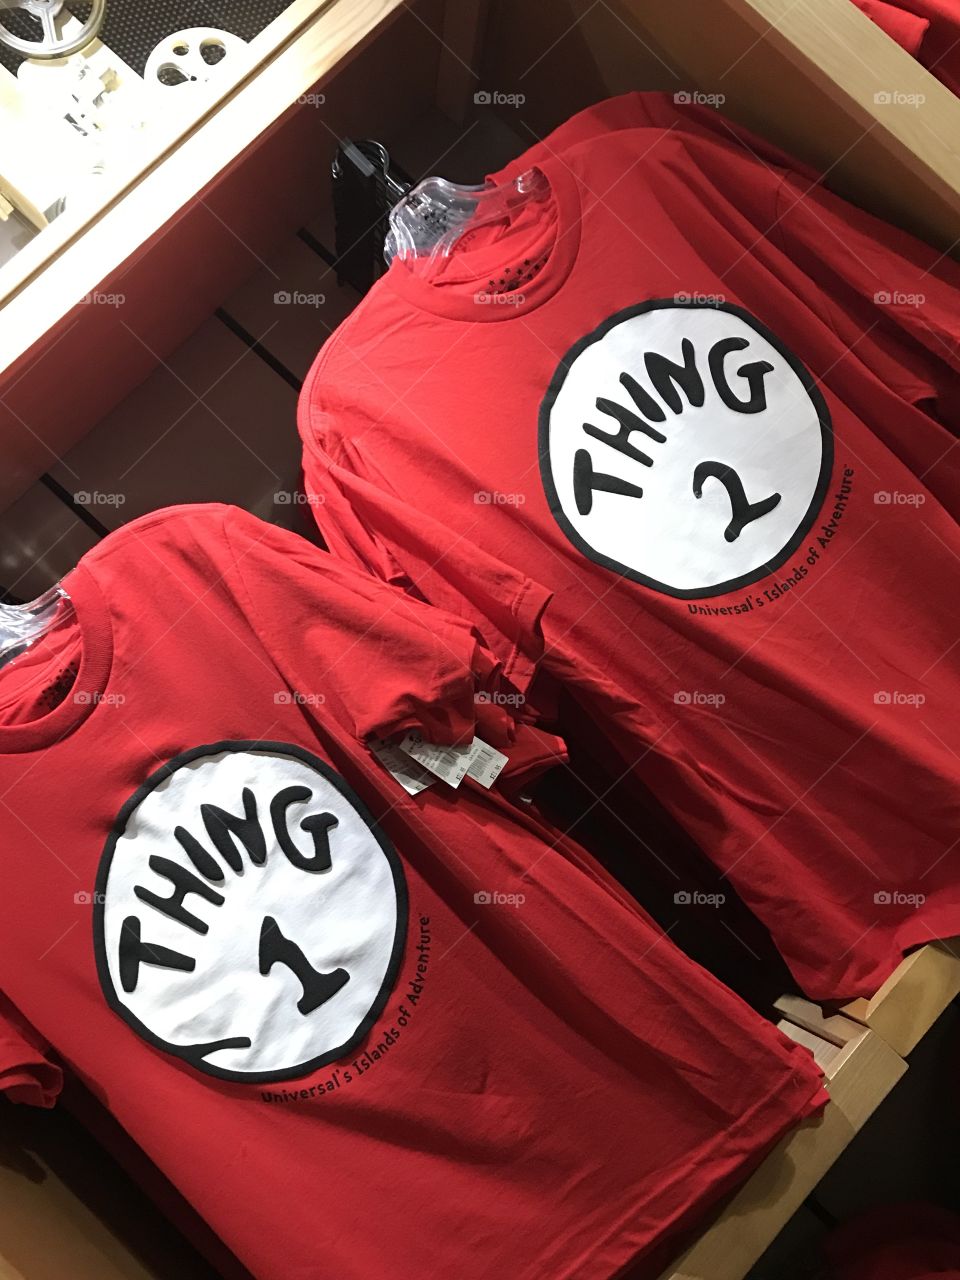 Dr Seuss Signature Thang. :) things. Thing 1, Thing 2...tees. Clothing, t shirt, wear, red